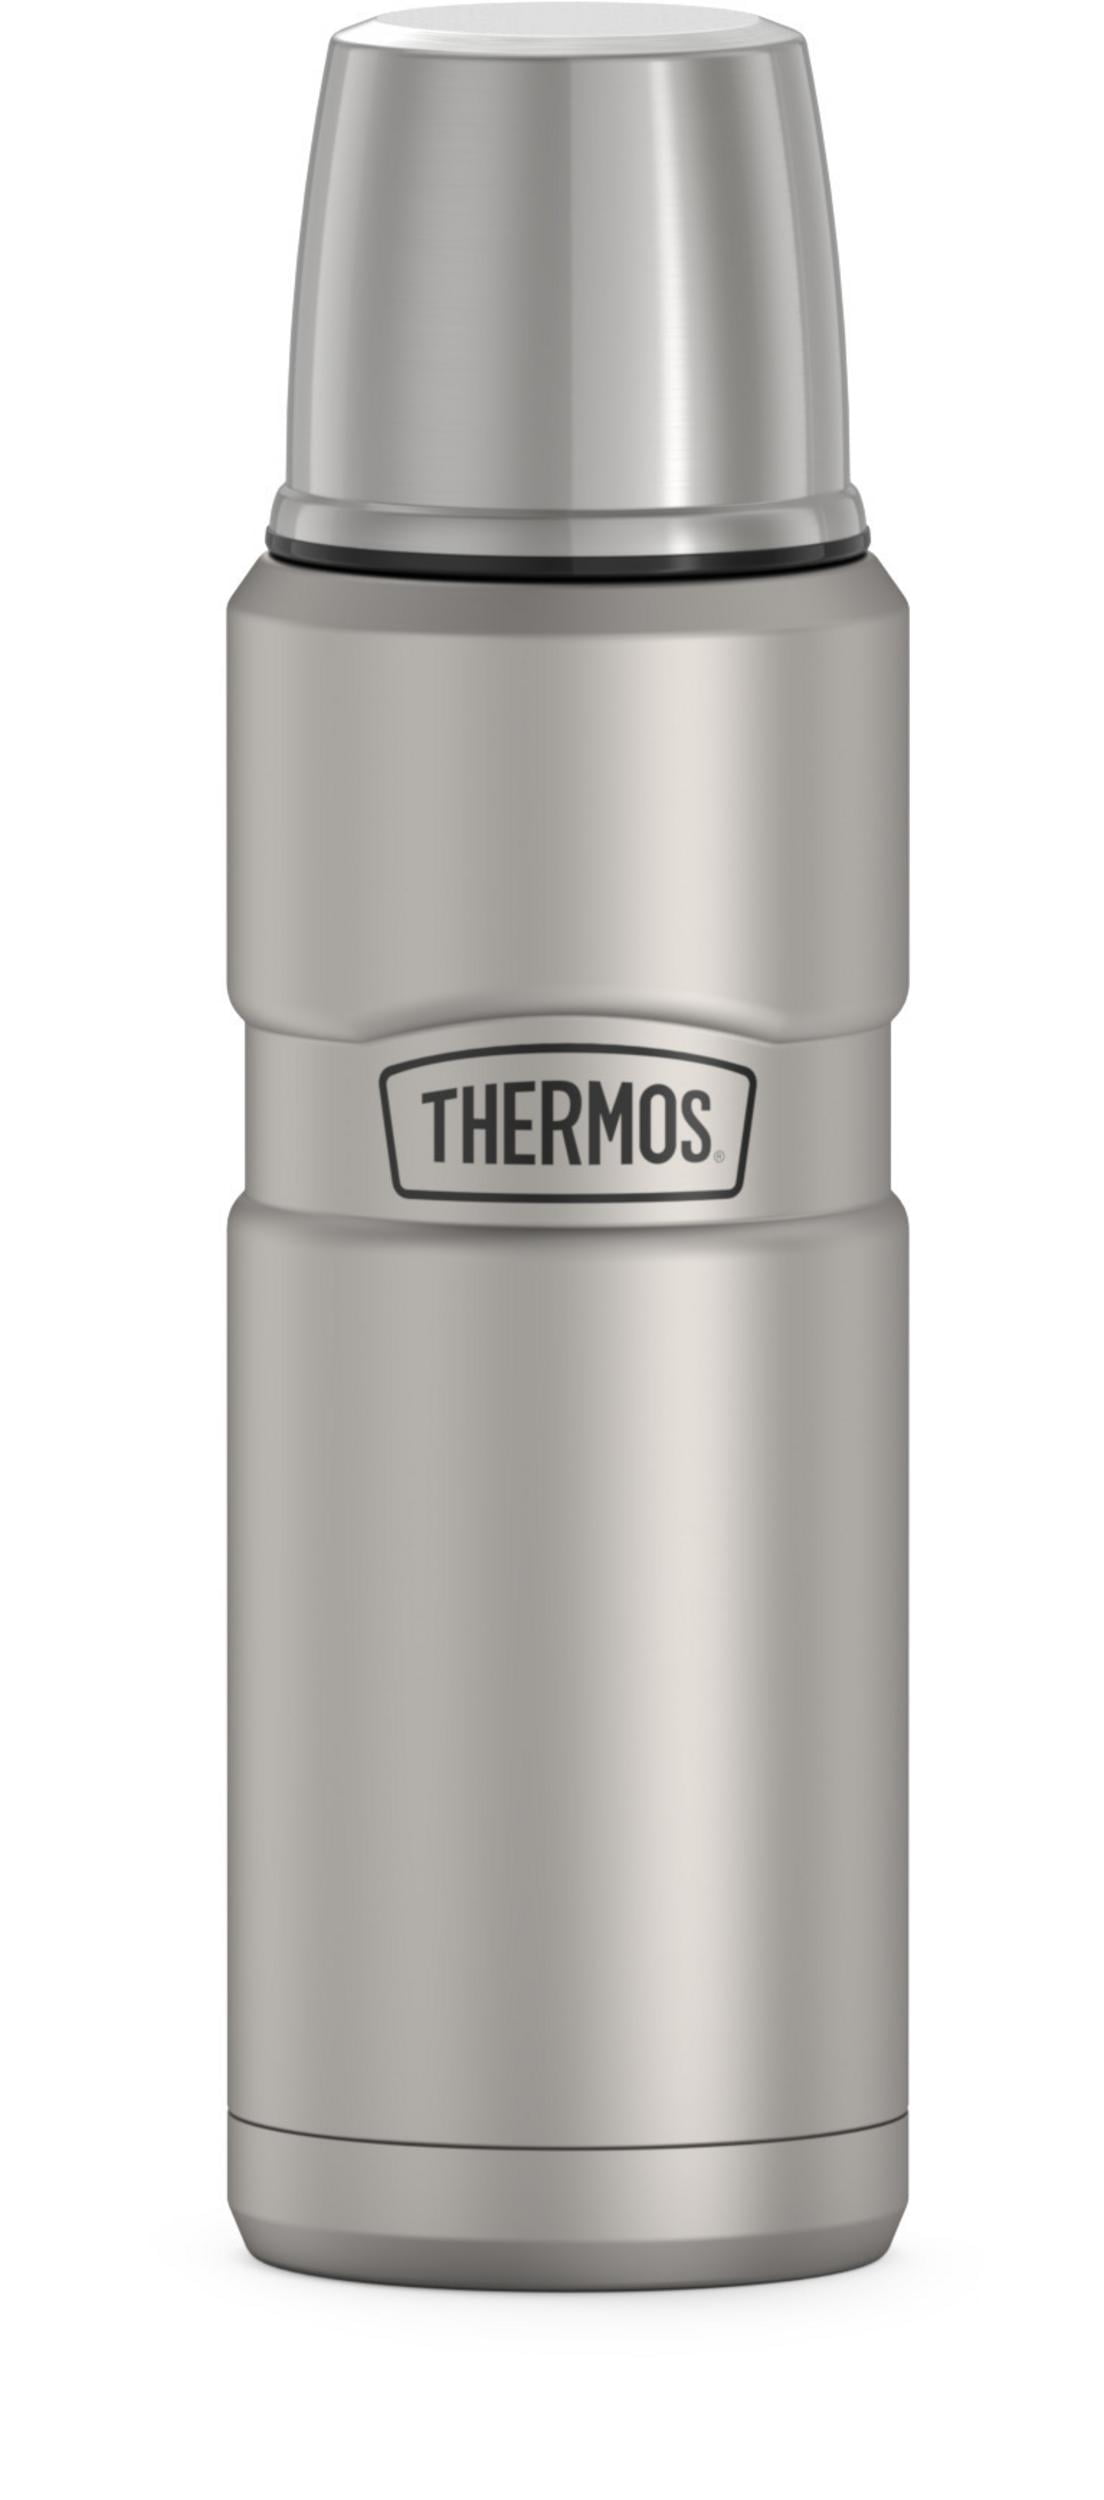 Thermos Vacuum Insulated Compact Stainless Steel Beverage Bottle 3 Sizes 